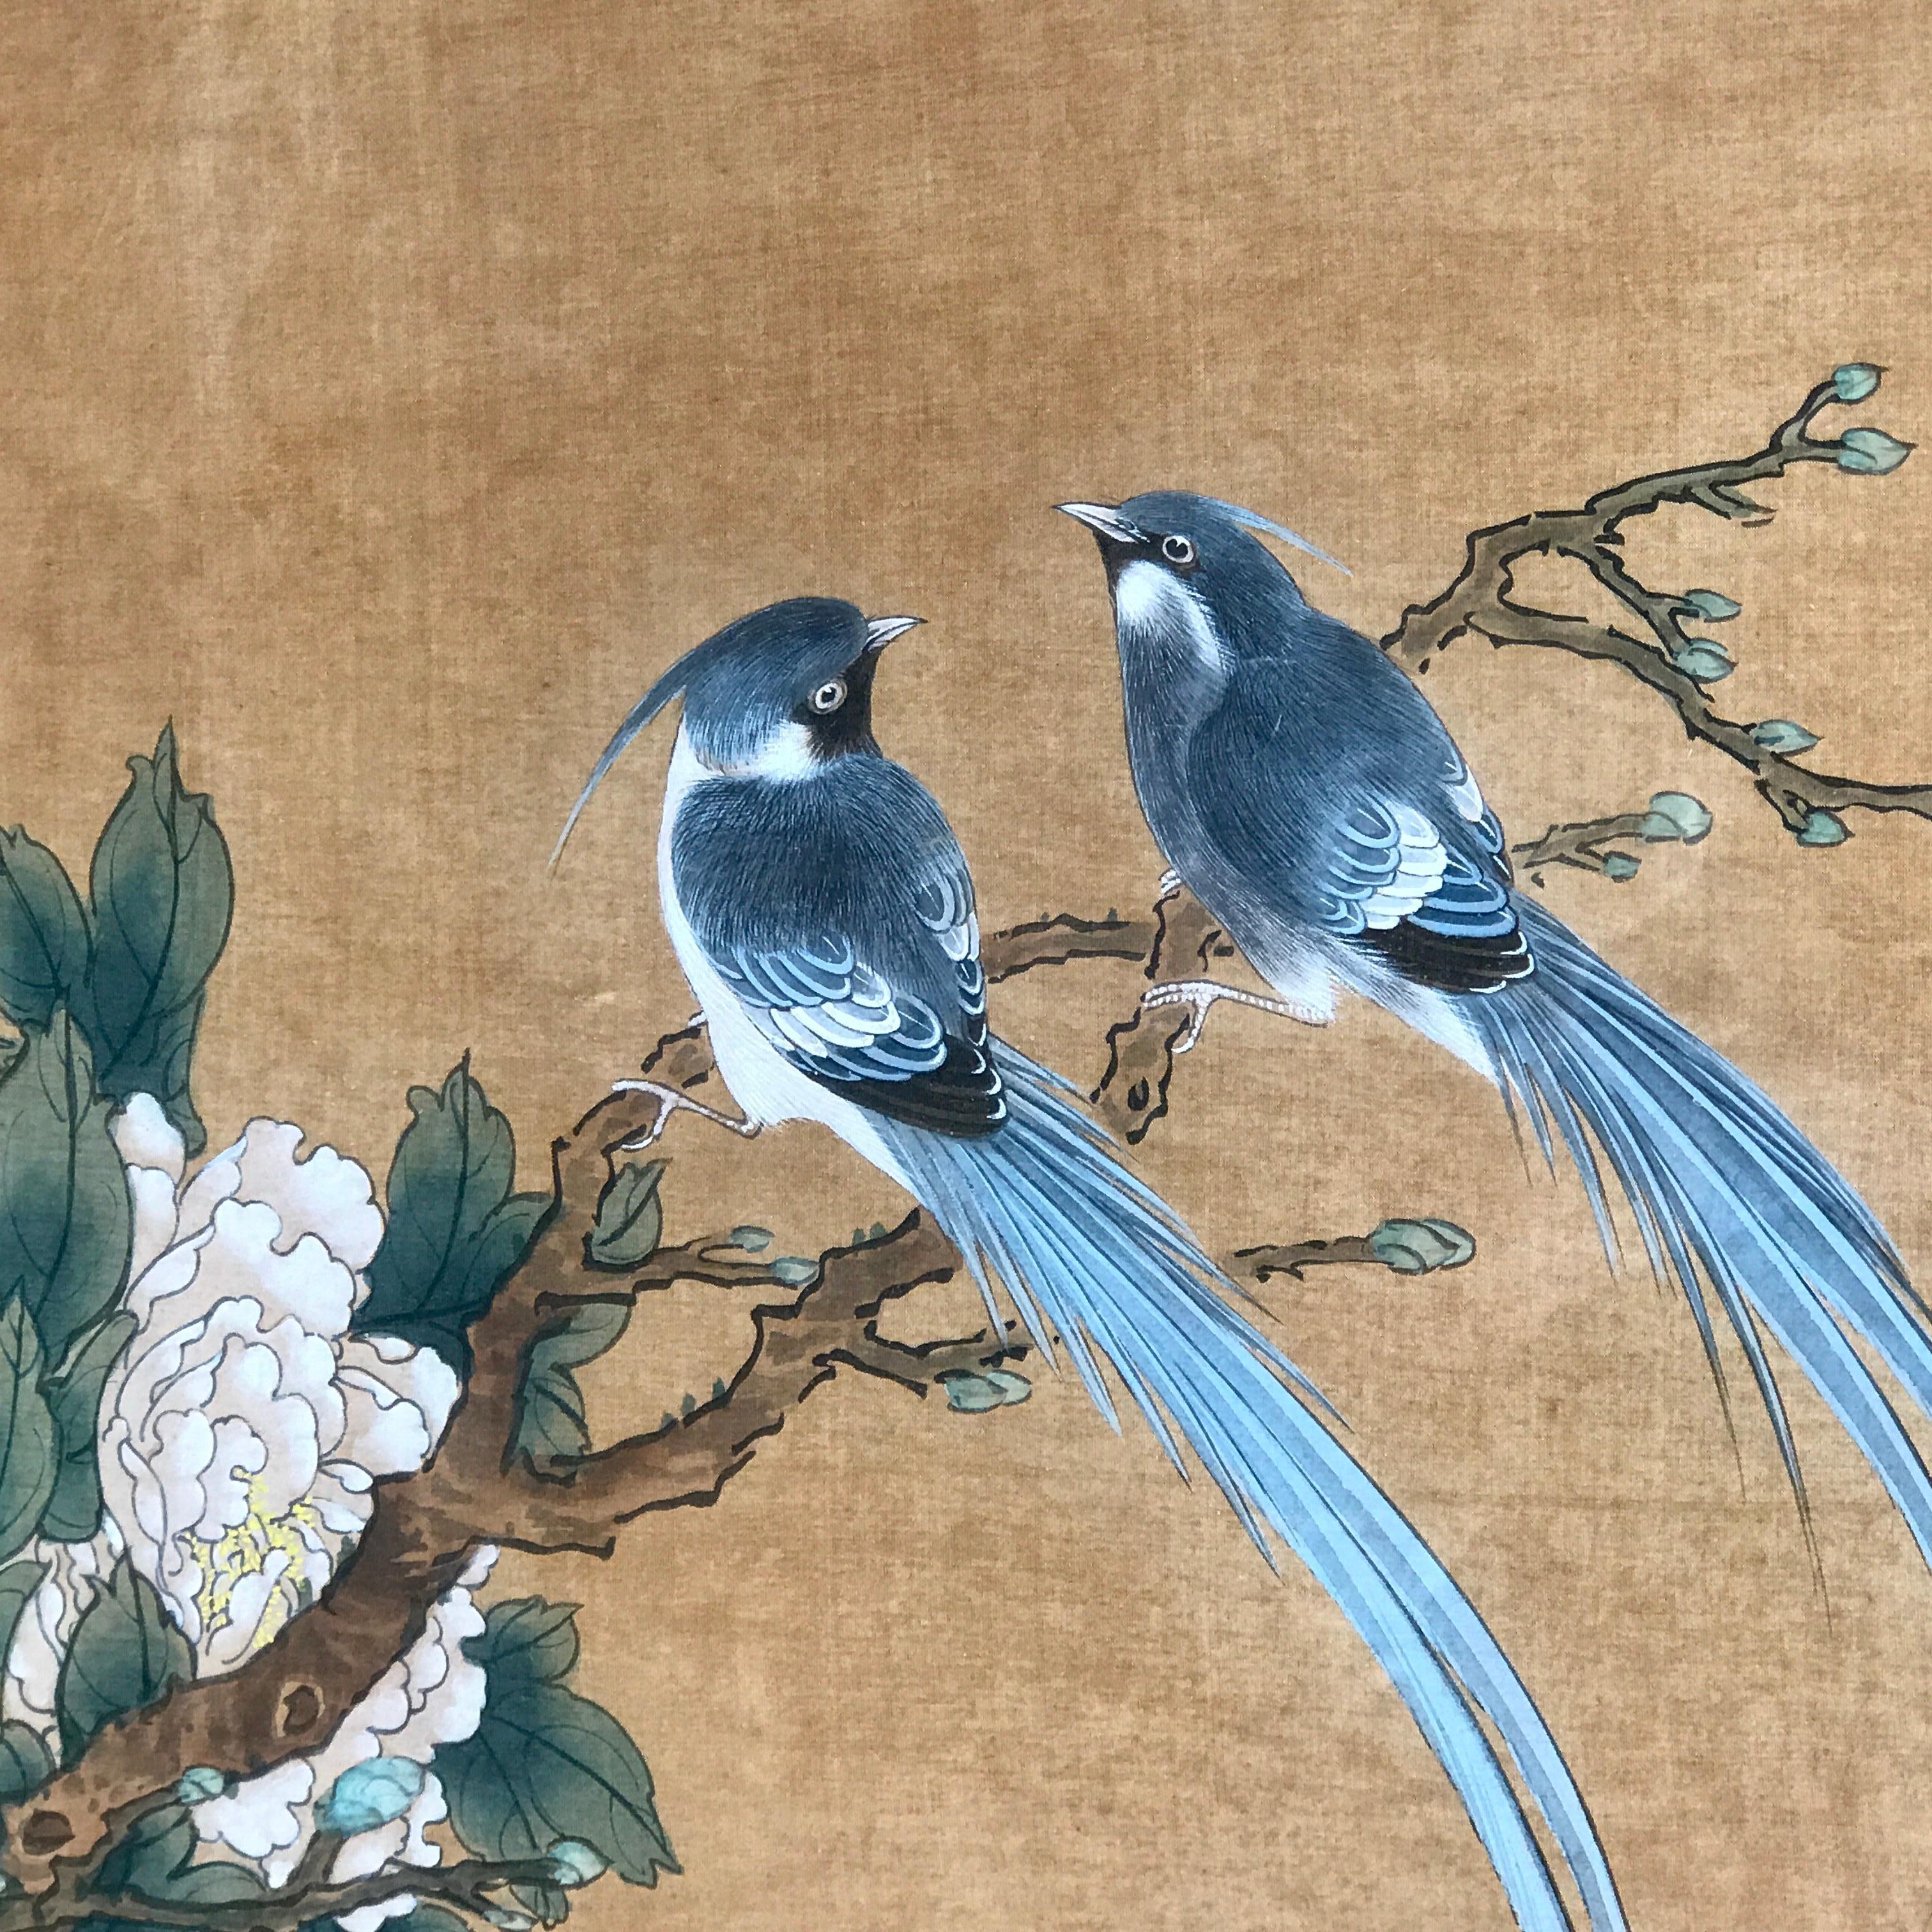 20th Century Chinese School Scroll Painting